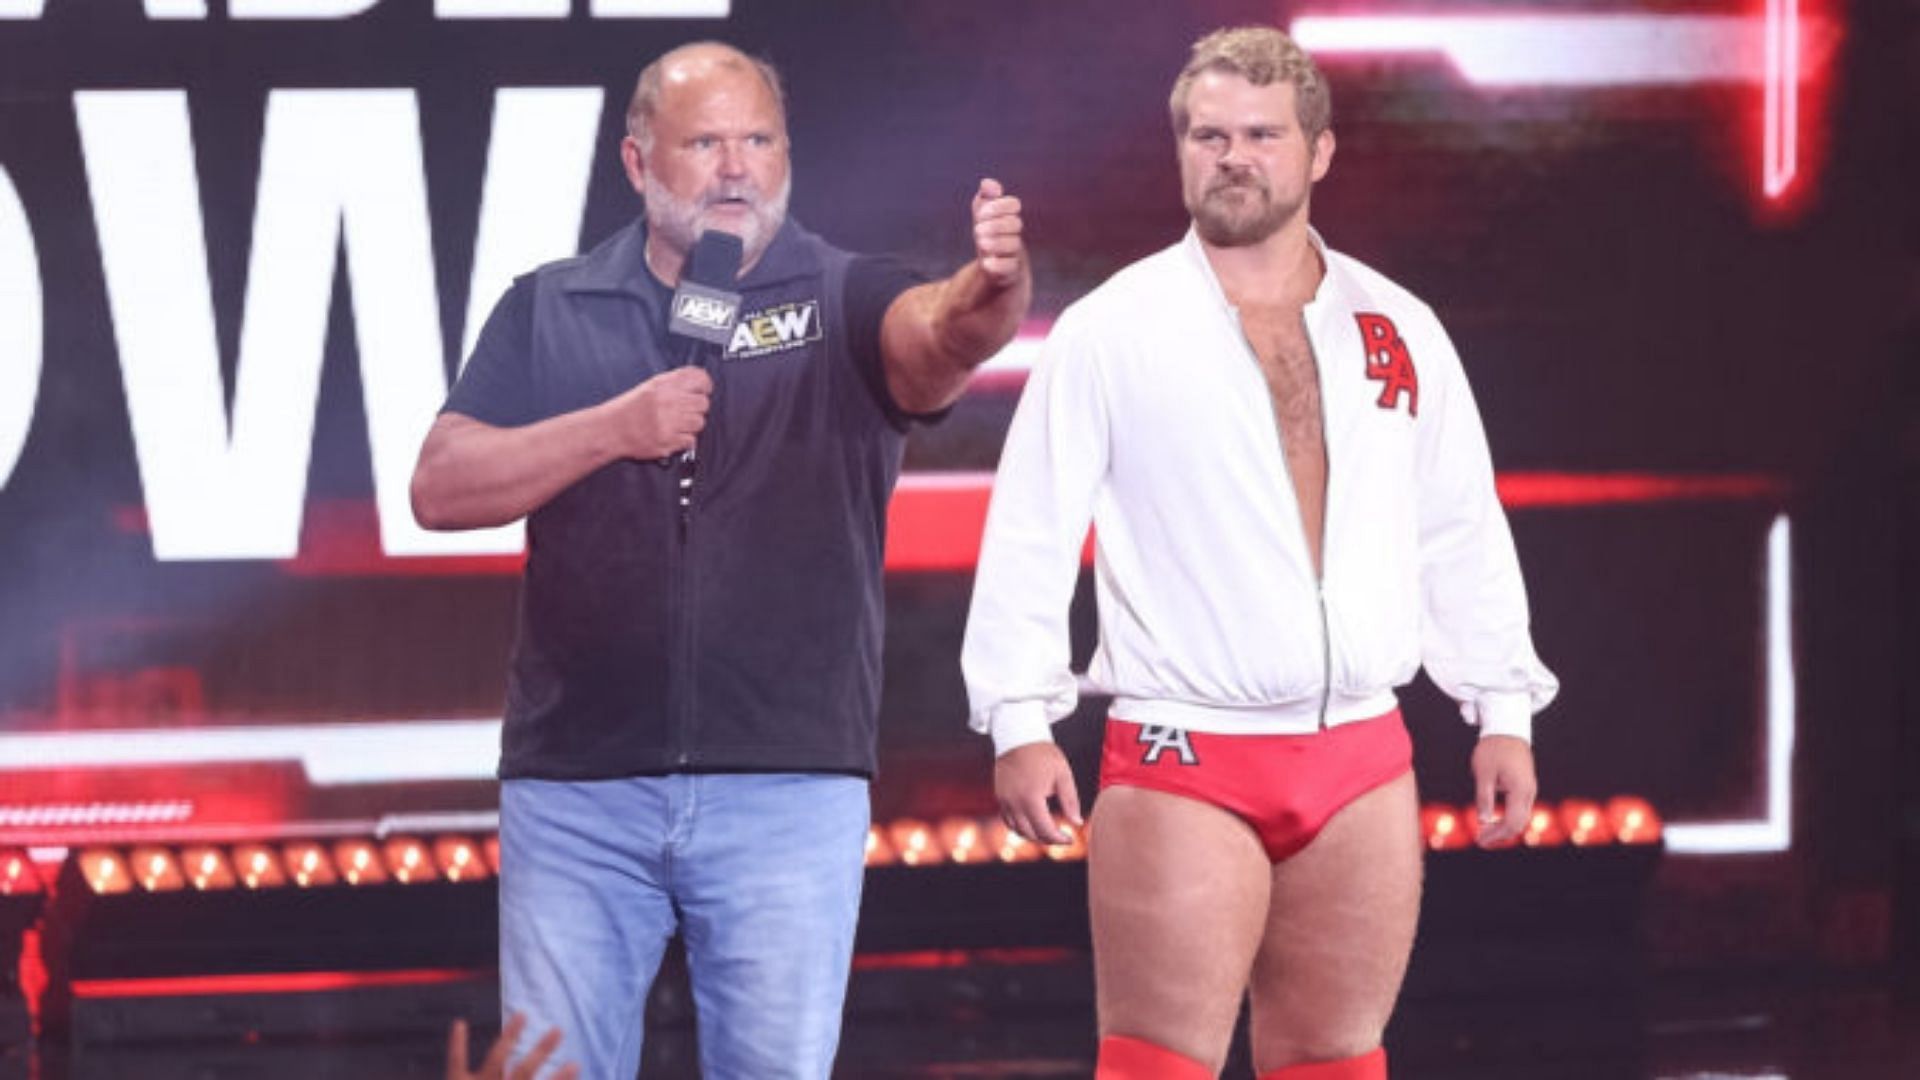 Brock Anderson is the son of WWE legend Arn Anderson.